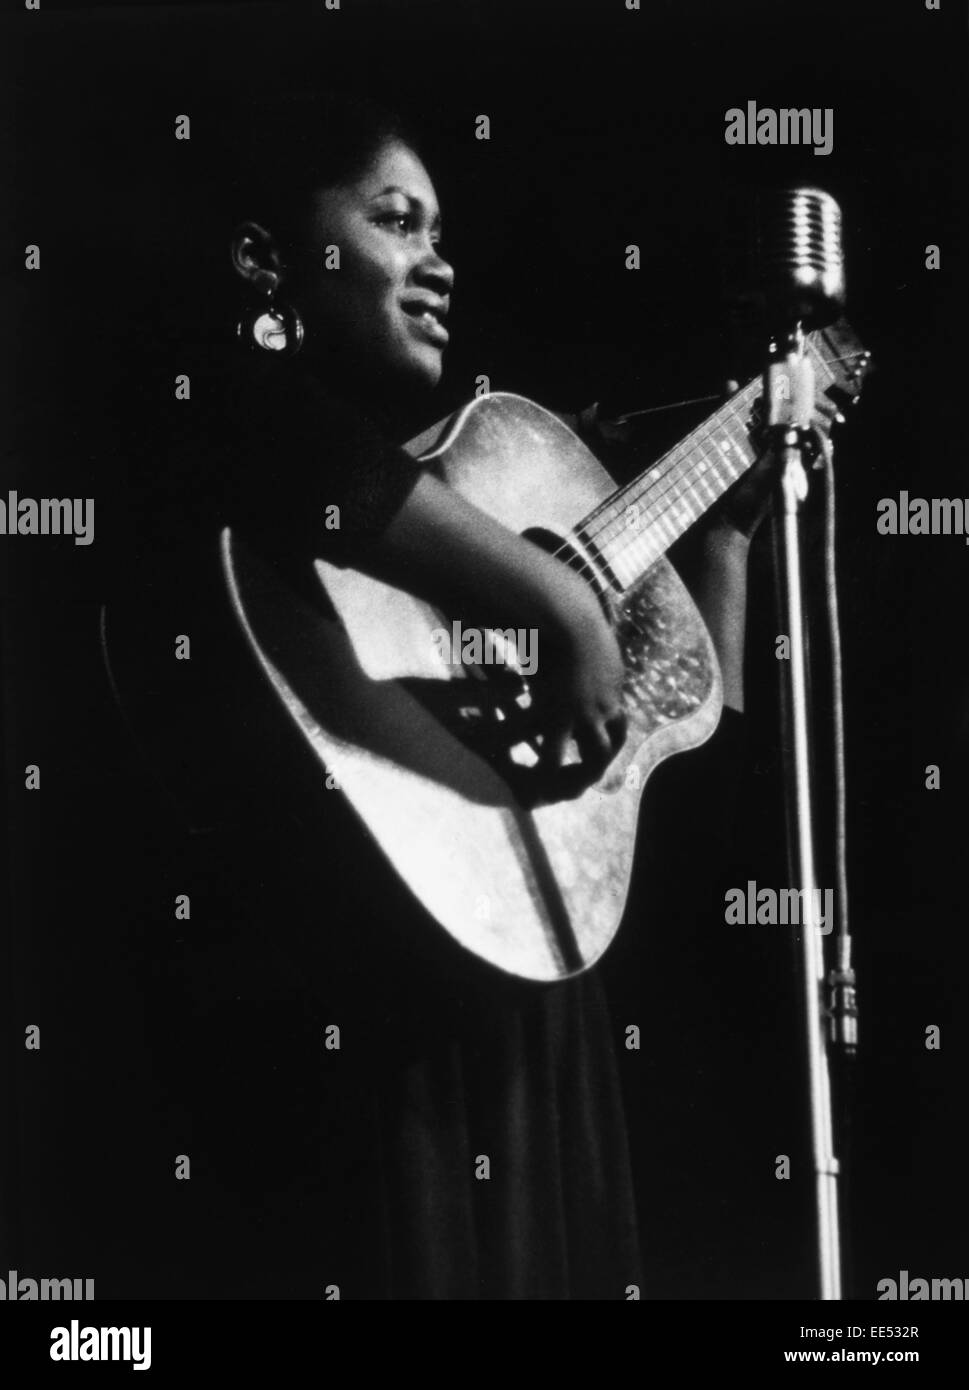 Odetta Holmes (1930-2008), also known as Odetta, American singer, actress, and Civil and Human Rights Activist, Portrait, 1957 Stock Photo